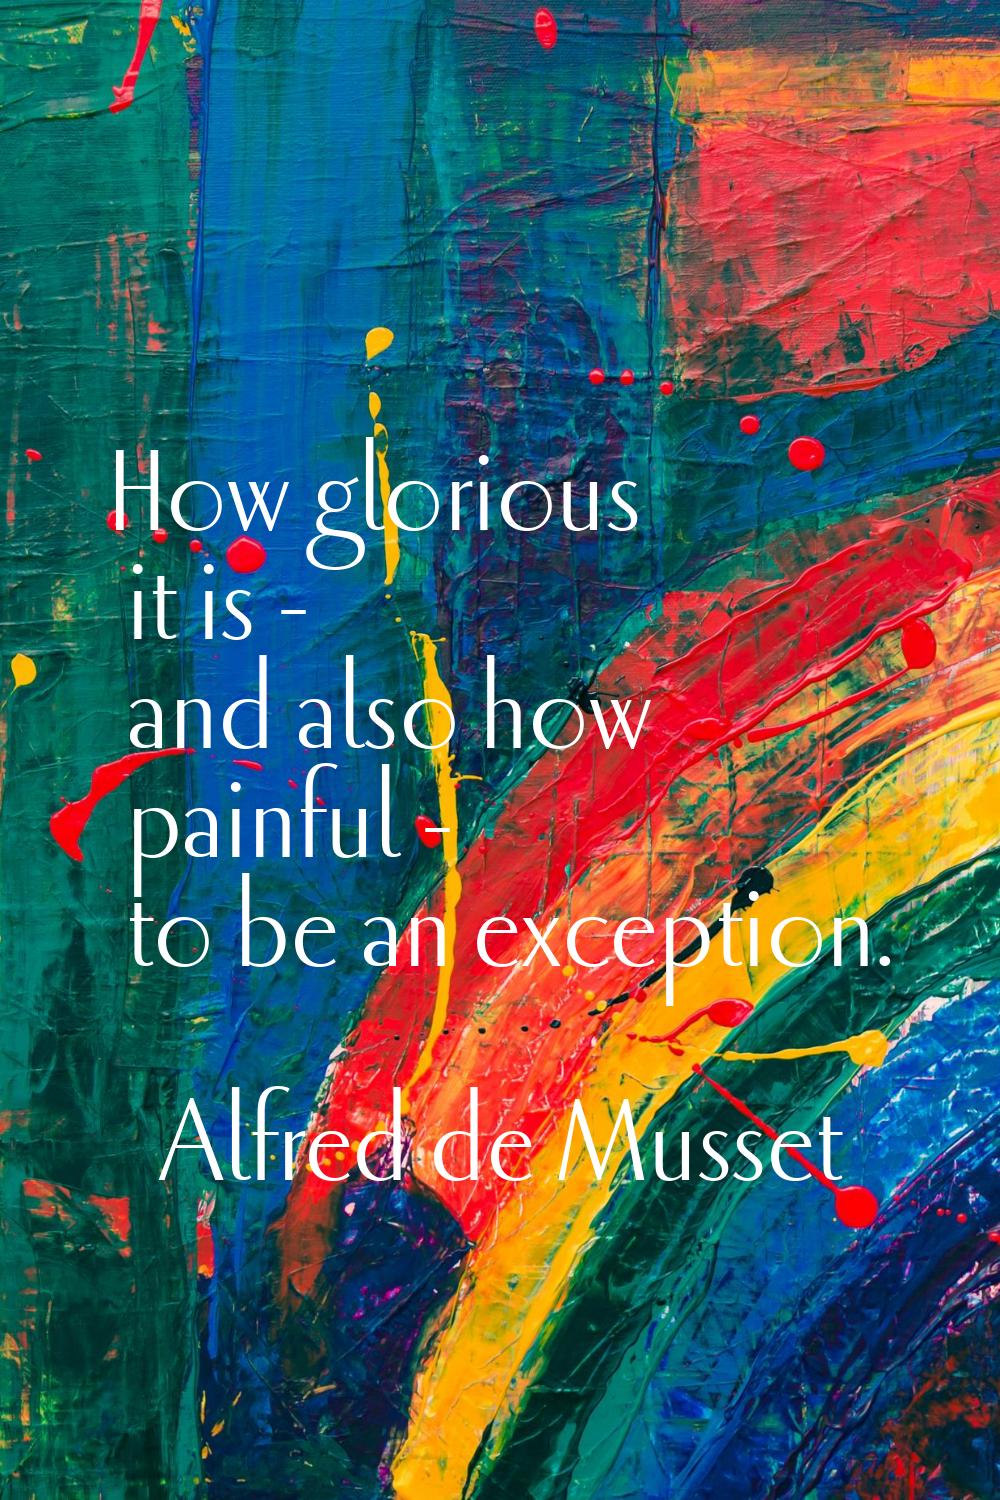 How glorious it is - and also how painful - to be an exception.